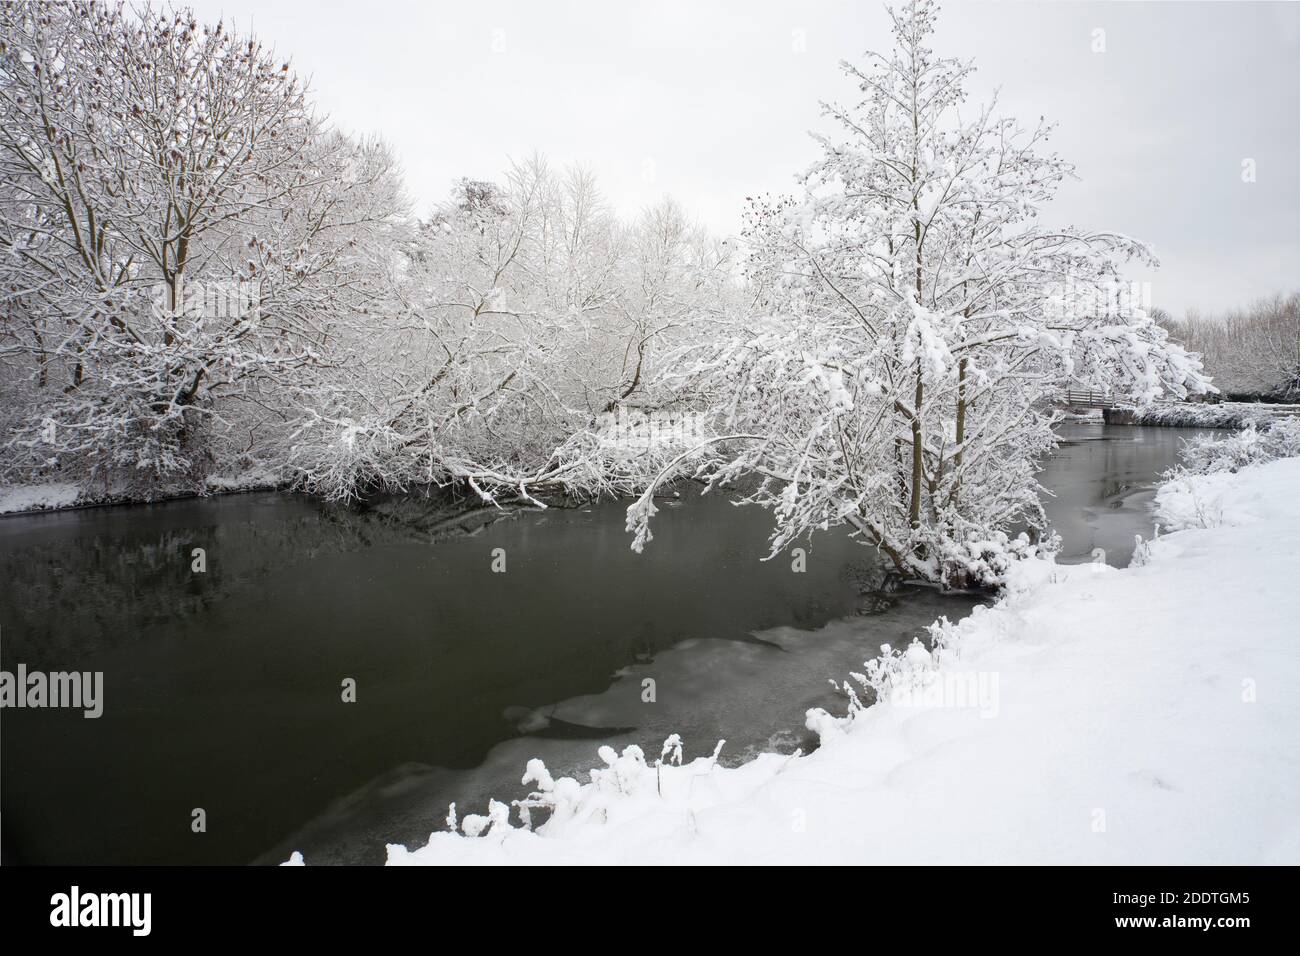 Snow, ice and willows on the wintry banks of the river Stour at Flatford in Suffolk Stock Photo